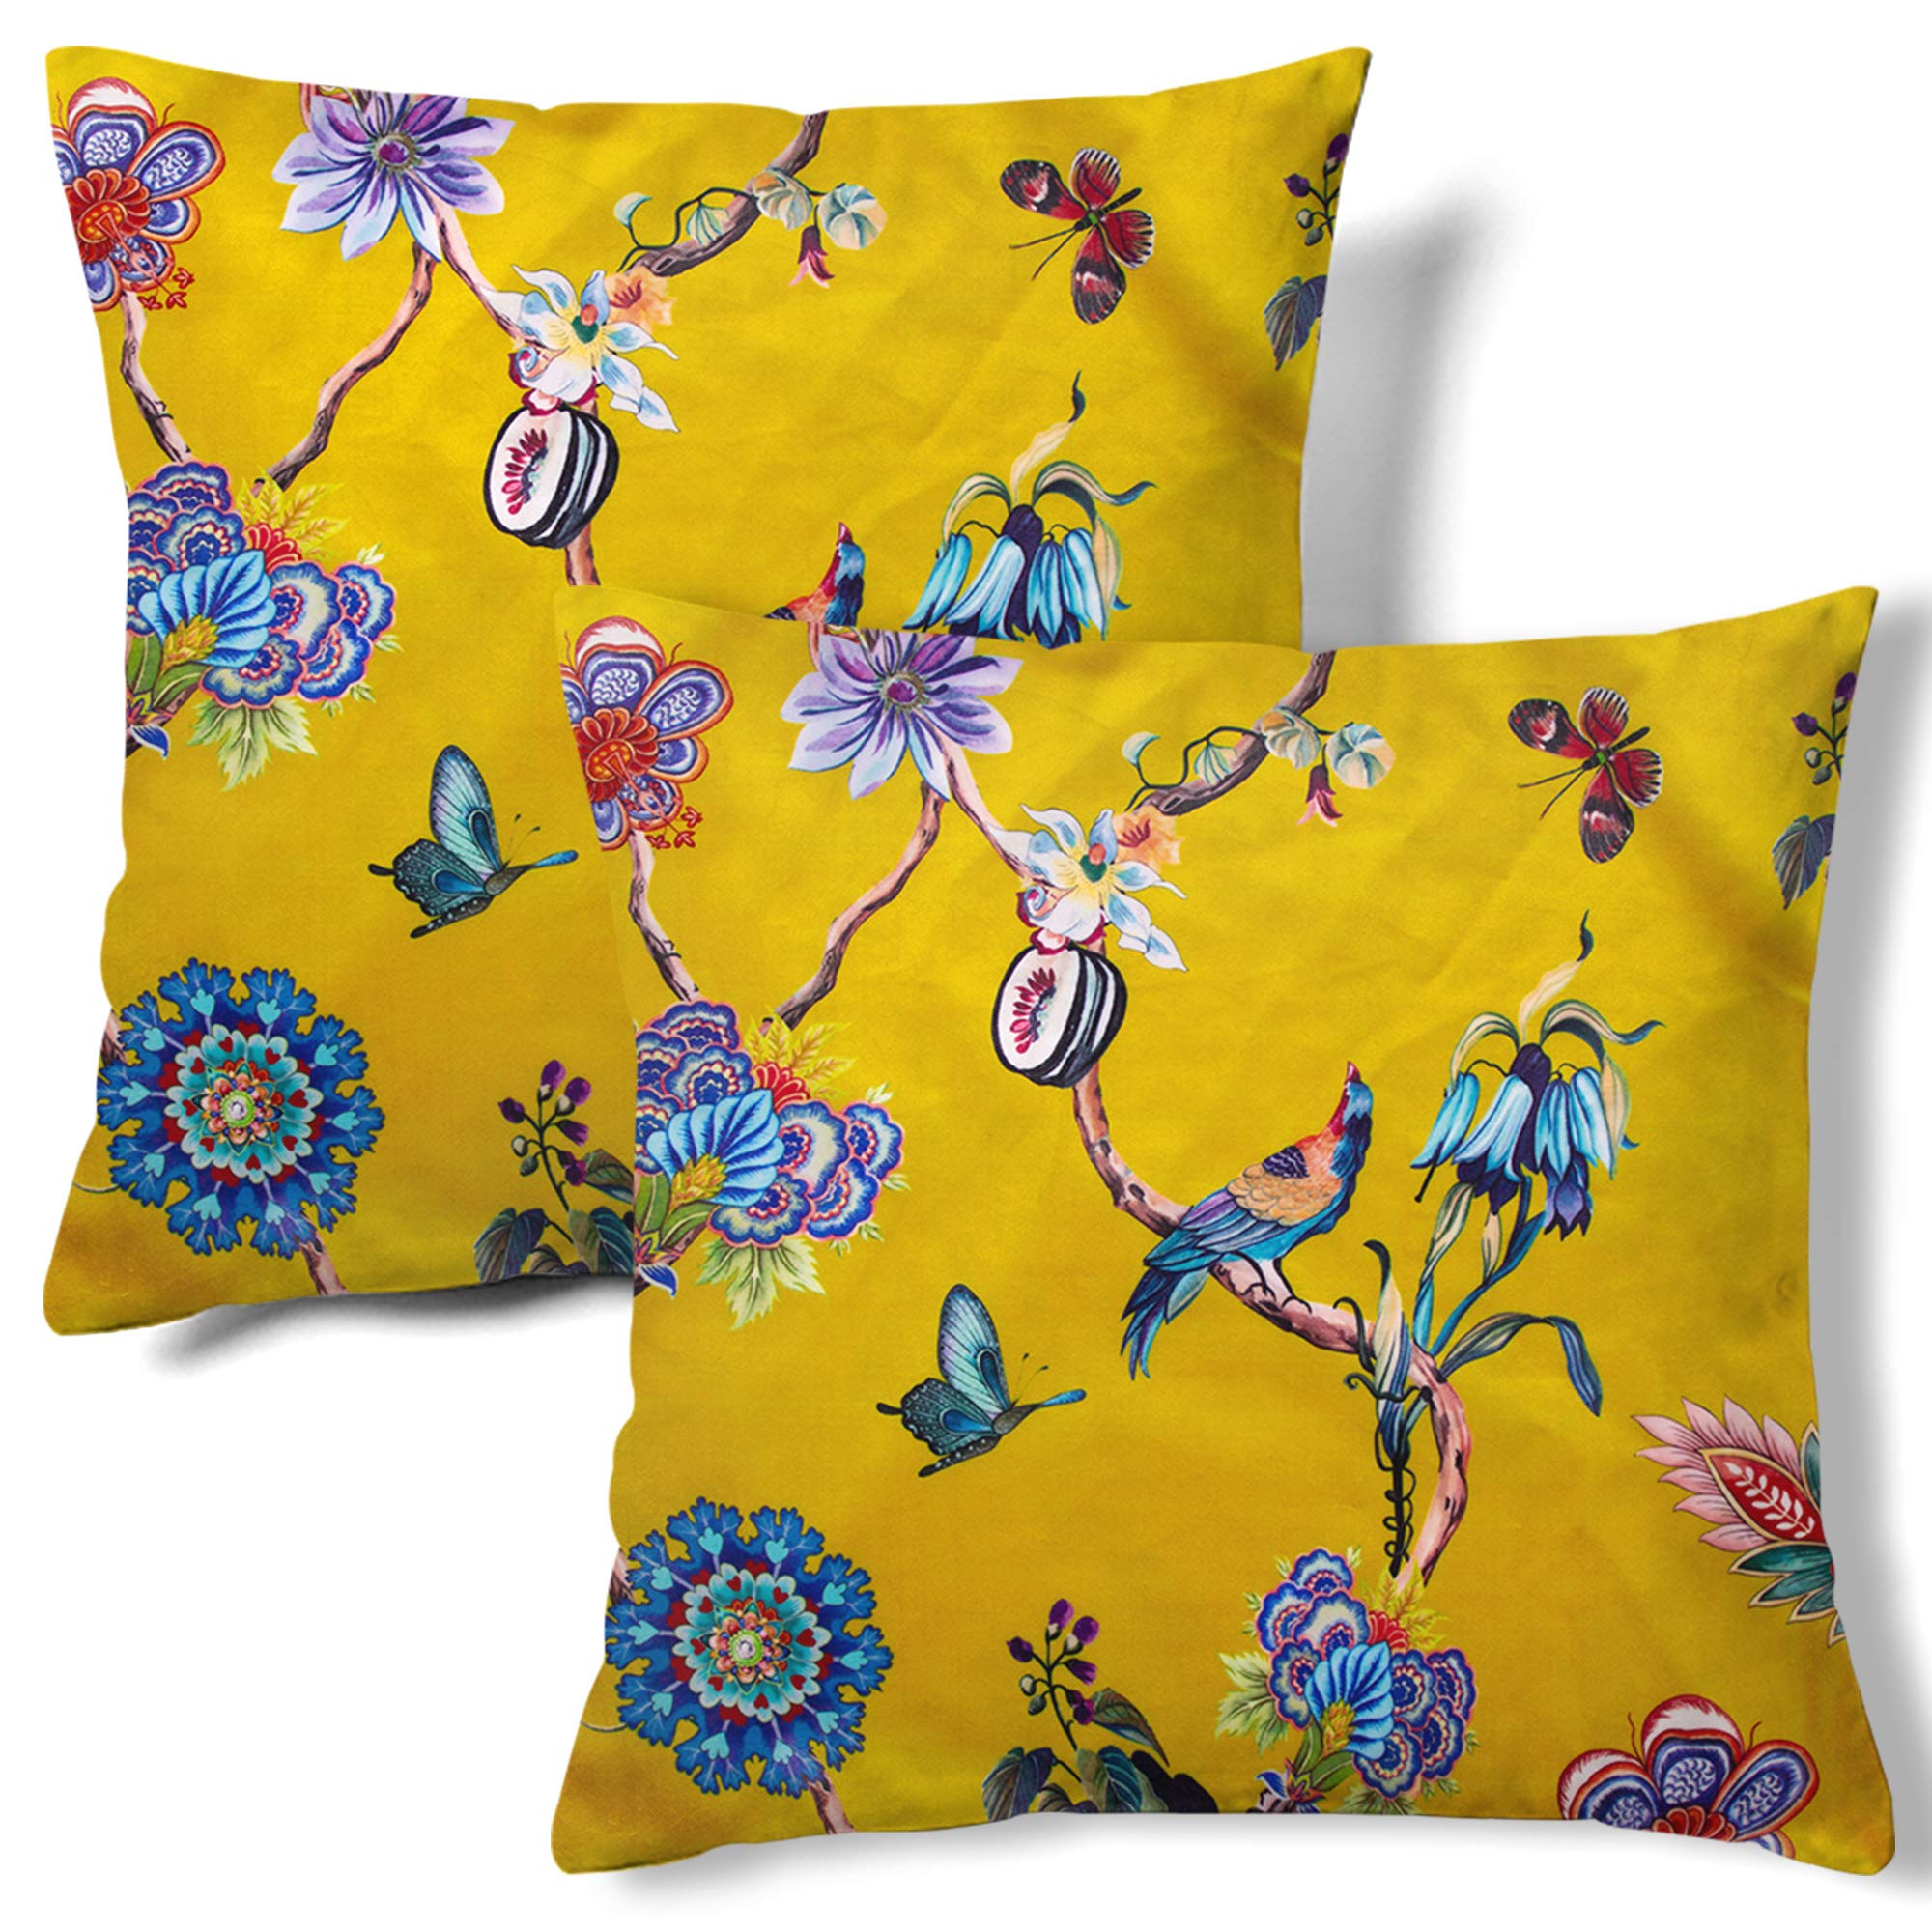 HMS Happy Memories Velvet Pillow Cases Square Decorative Throw Pillow Cover 45x45cm(18x18 Inch) Set of 2 for Couch Sofa Bed Living Room Bedroom (Yellow Bird Boho)